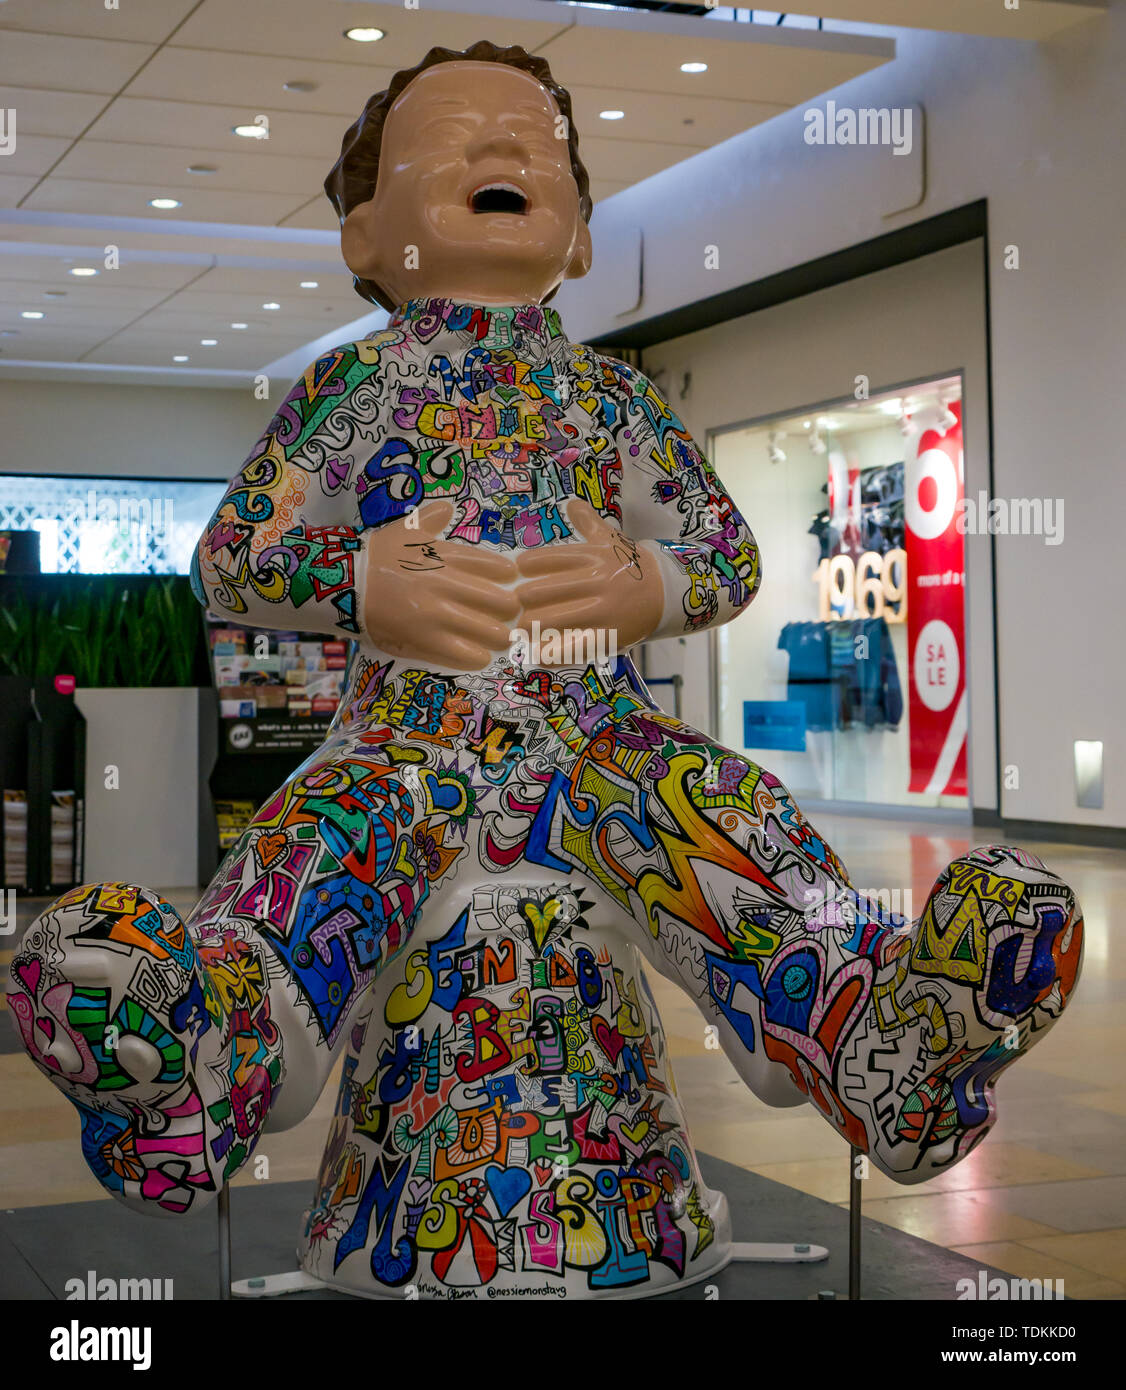 Leith, Edinburgh, Scotland, United Kingdom, 17 June 2019. Oor Wullie's Big Bucket Trail: An art trail of 200 Oor Wullie sculptures appear in Scottish cities in a mass arts event that lasts until August 30th. Oor Wullie is an iconic Scottish cartoon character. The sculptures will be auctioned to raise money for charities. There are 5 in the Leith area, and 60 in Edinburgh altogether. The Proclaimers, Craig Reid, at Ocean Terminal by Vanessa Gibson Stock Photo